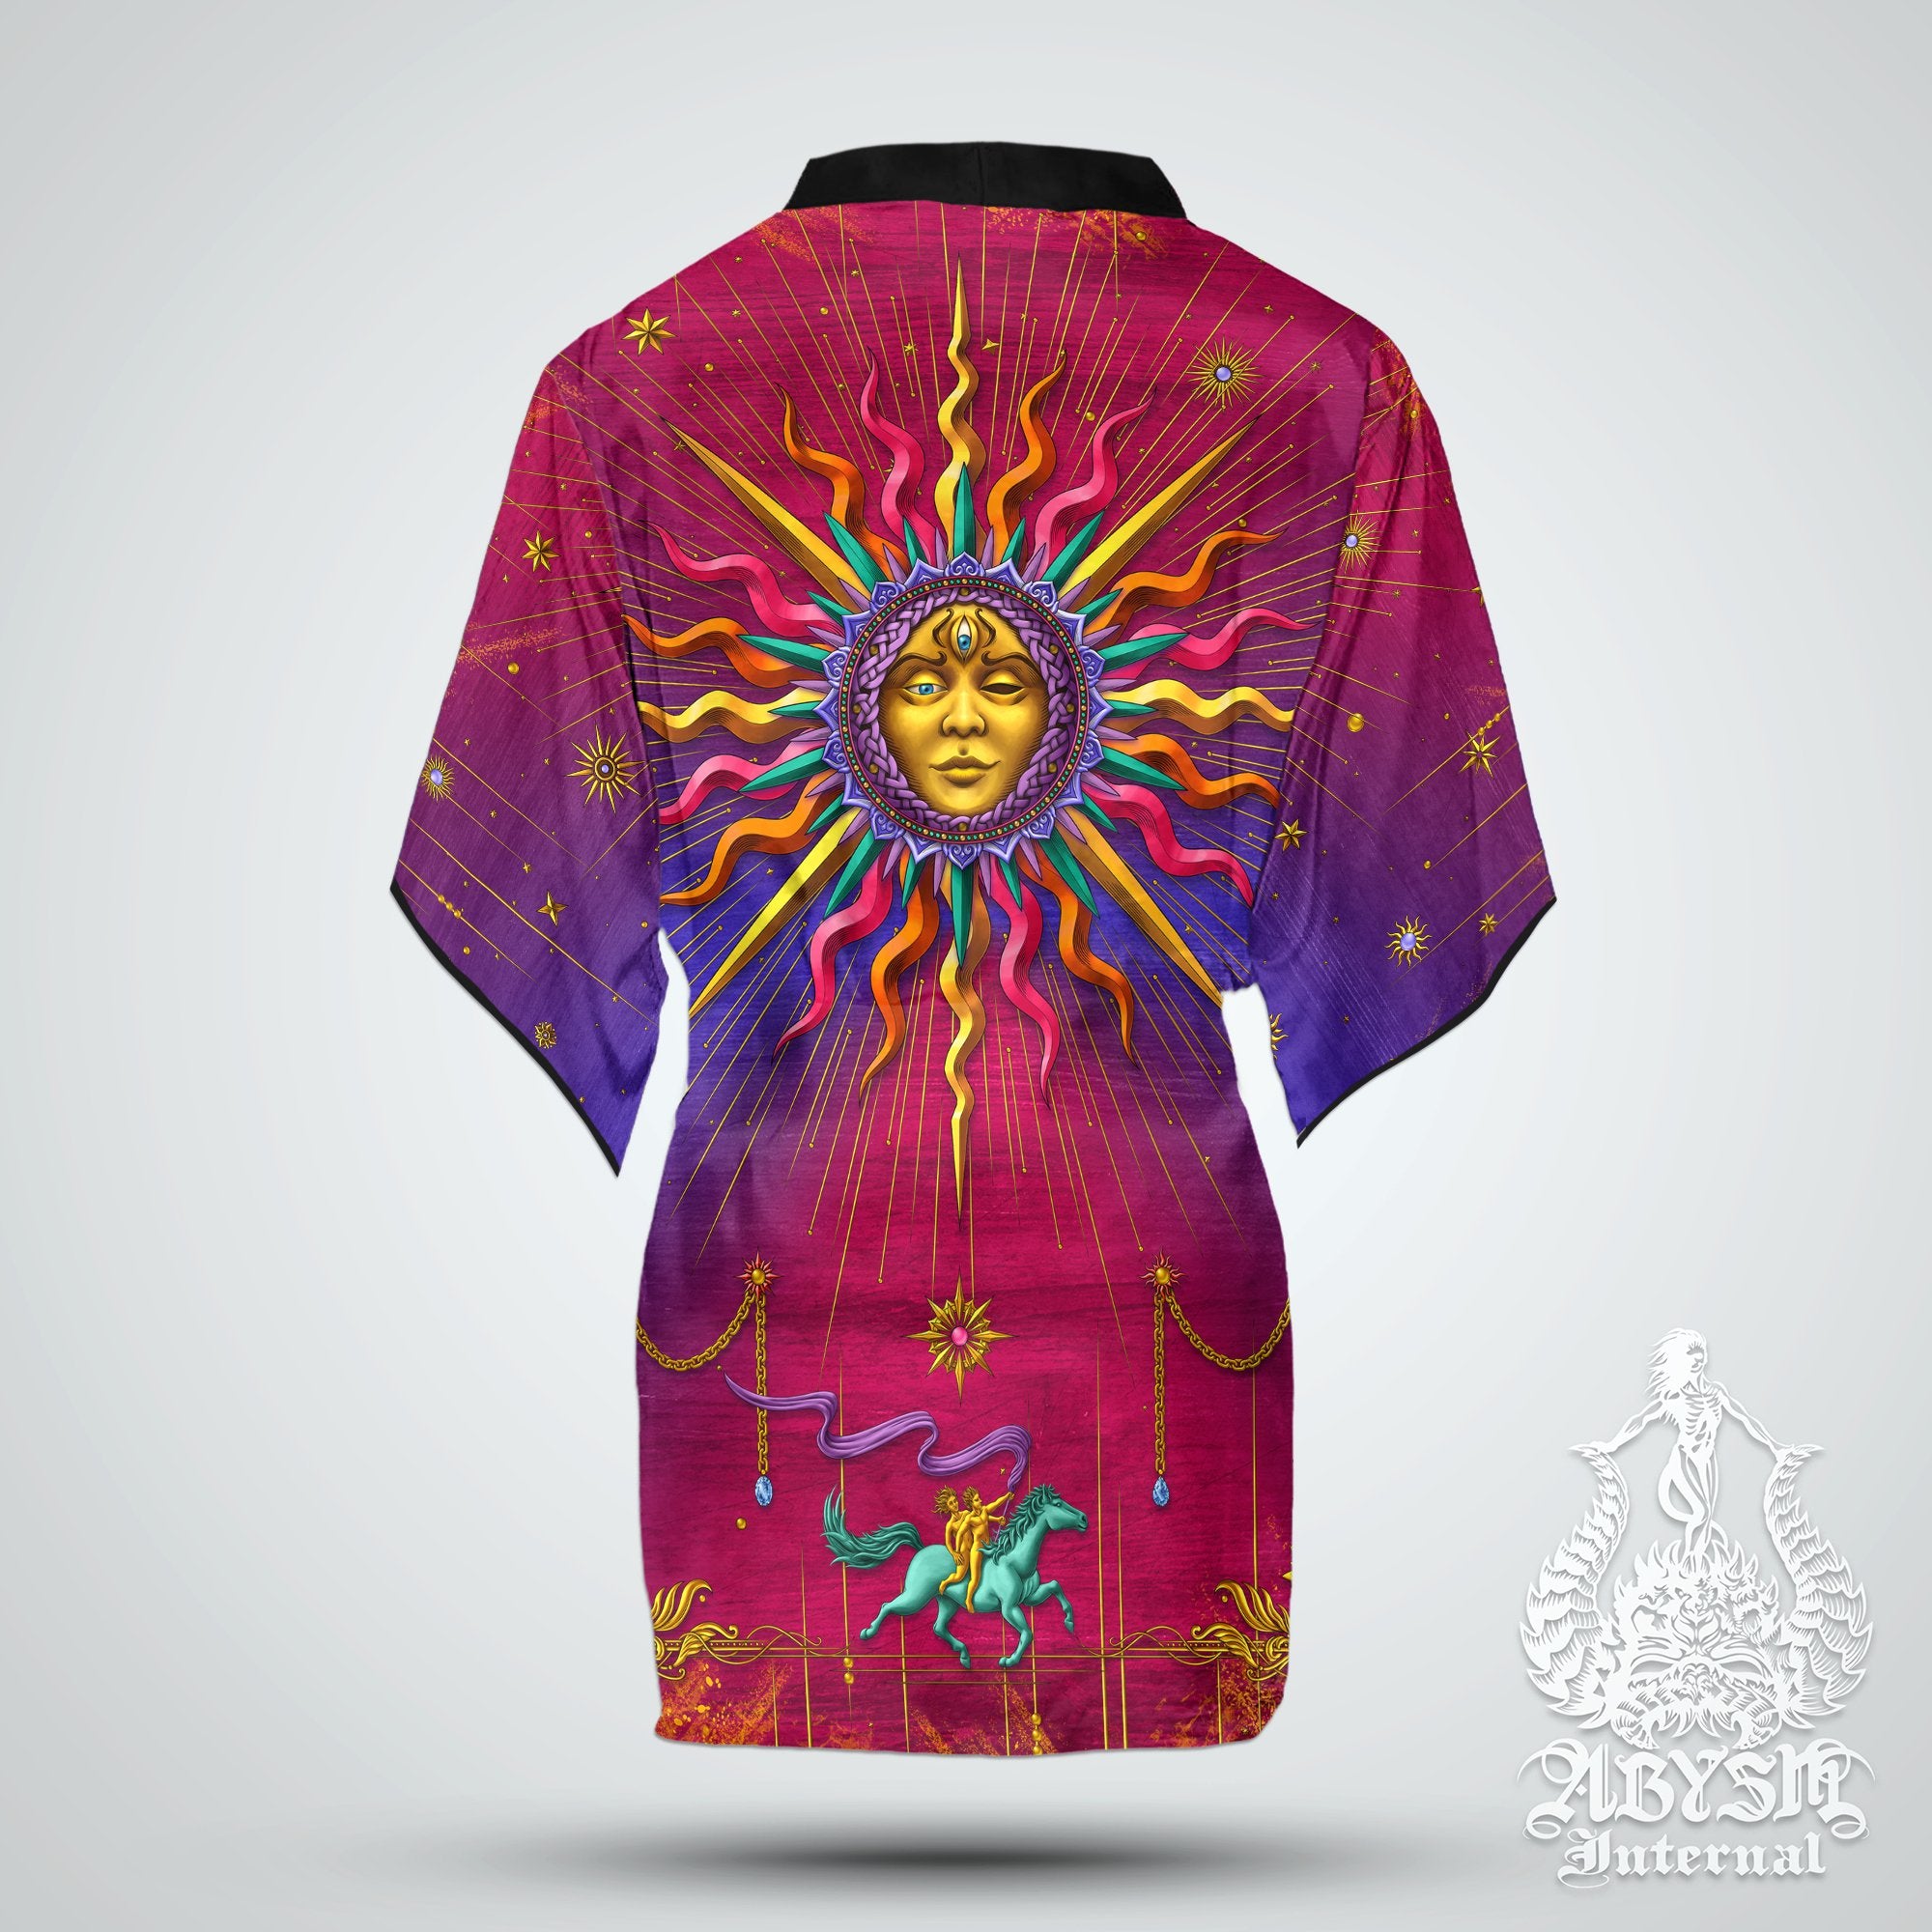 The Sun Short Kimono Robe, Trippy Beach Party Outfit, Tarot Arcana Coverup, Psychedelic Summer Festival, Rave Clothing, Unisex - Psy - Abysm Internal